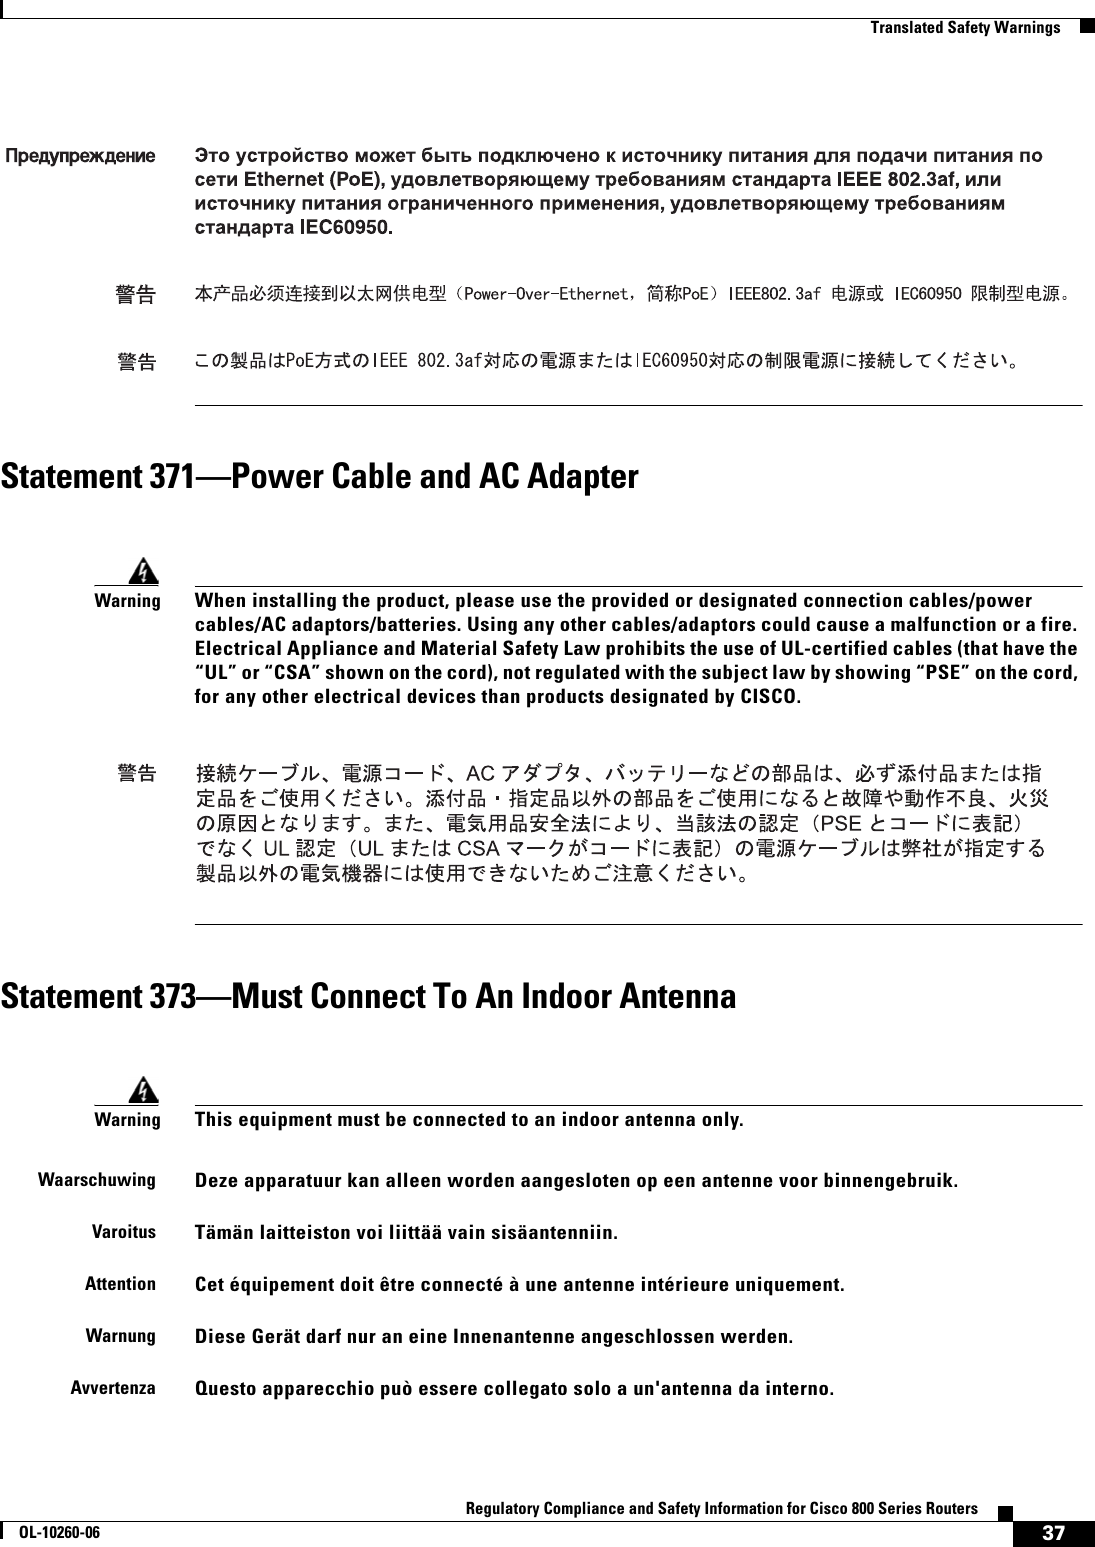 37Regulatory Compliance and Safety Information for Cisco 800 Series RoutersOL-10260-06  Translated Safety WarningsStatement 371—Power Cable and AC AdapterStatement 373—Must Connect To An Indoor AntennaWarningWhen installing the product, please use the provided or designated connection cables/power cables/AC adaptors/batteries. Using any other cables/adaptors could cause a malfunction or a fire. Electrical Appliance and Material Safety Law prohibits the use of UL-certified cables (that have the “UL” or “CSA” shown on the cord), not regulated with the subject law by showing “PSE” on the cord, for any other electrical devices than products designated by CISCO.WarningThis equipment must be connected to an indoor antenna only.WaarschuwingDeze apparatuur kan alleen worden aangesloten op een antenne voor binnengebruik.VaroitusTämän laitteiston voi liittää vain sisäantenniin.AttentionCet équipement doit être connecté à une antenne intérieure uniquement.WarnungDiese Gerät darf nur an eine Innenantenne angeschlossen werden.AvvertenzaQuesto apparecchio può essere collegato solo a un&apos;antenna da interno.